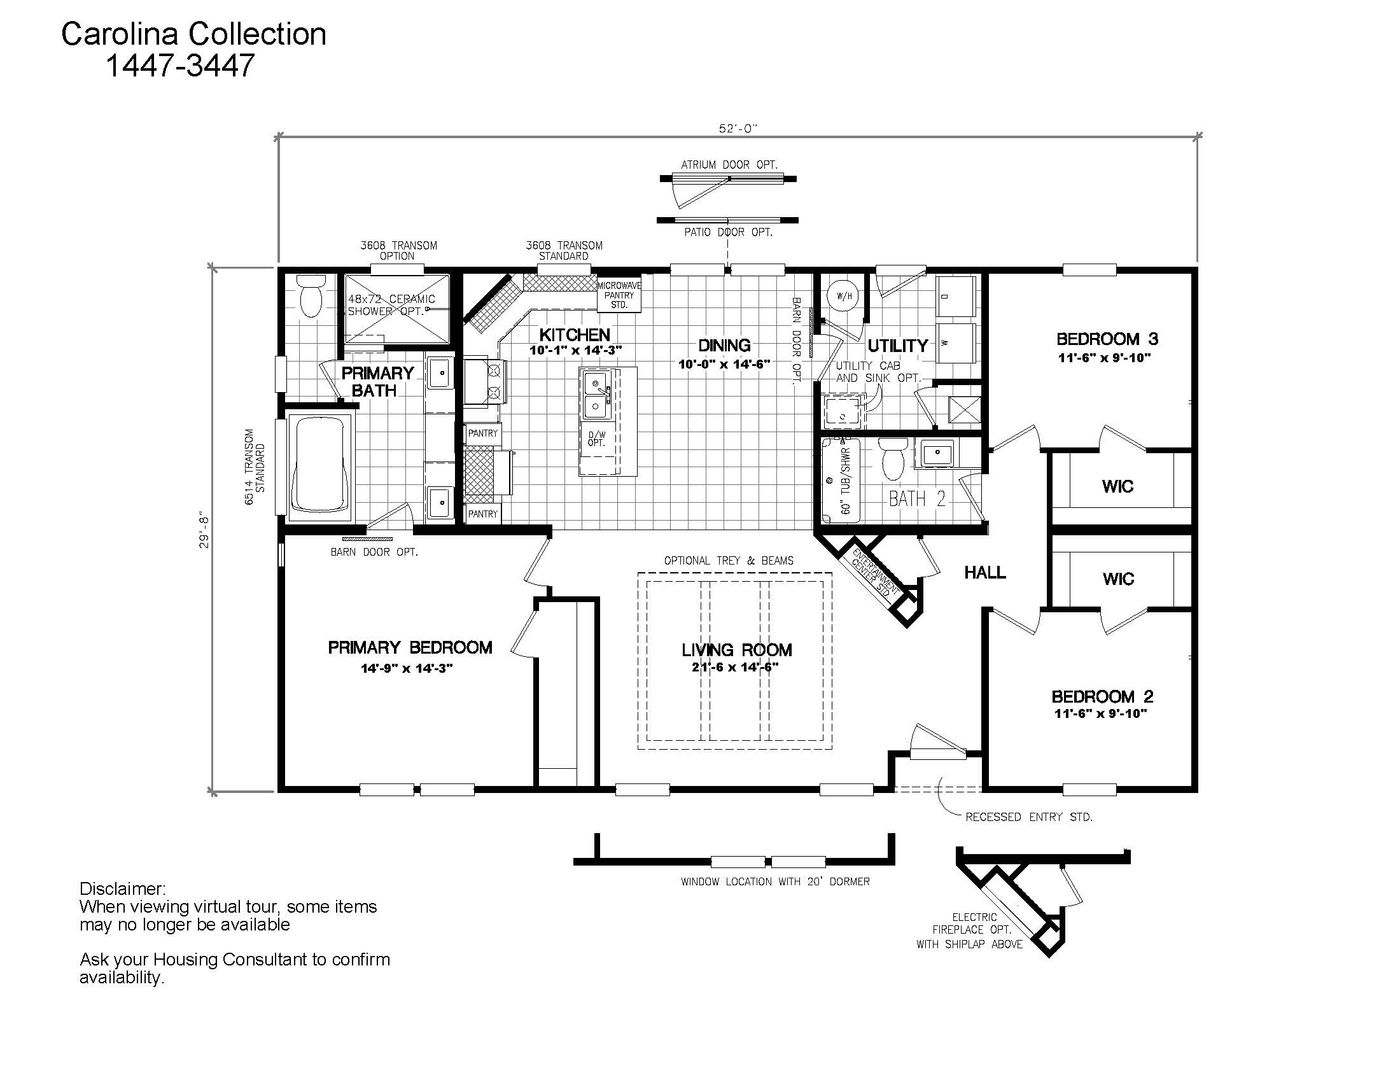 The 1447 CAROLINA Floor Plan. This Manufactured Mobile Home features 3 bedrooms and 2 baths.